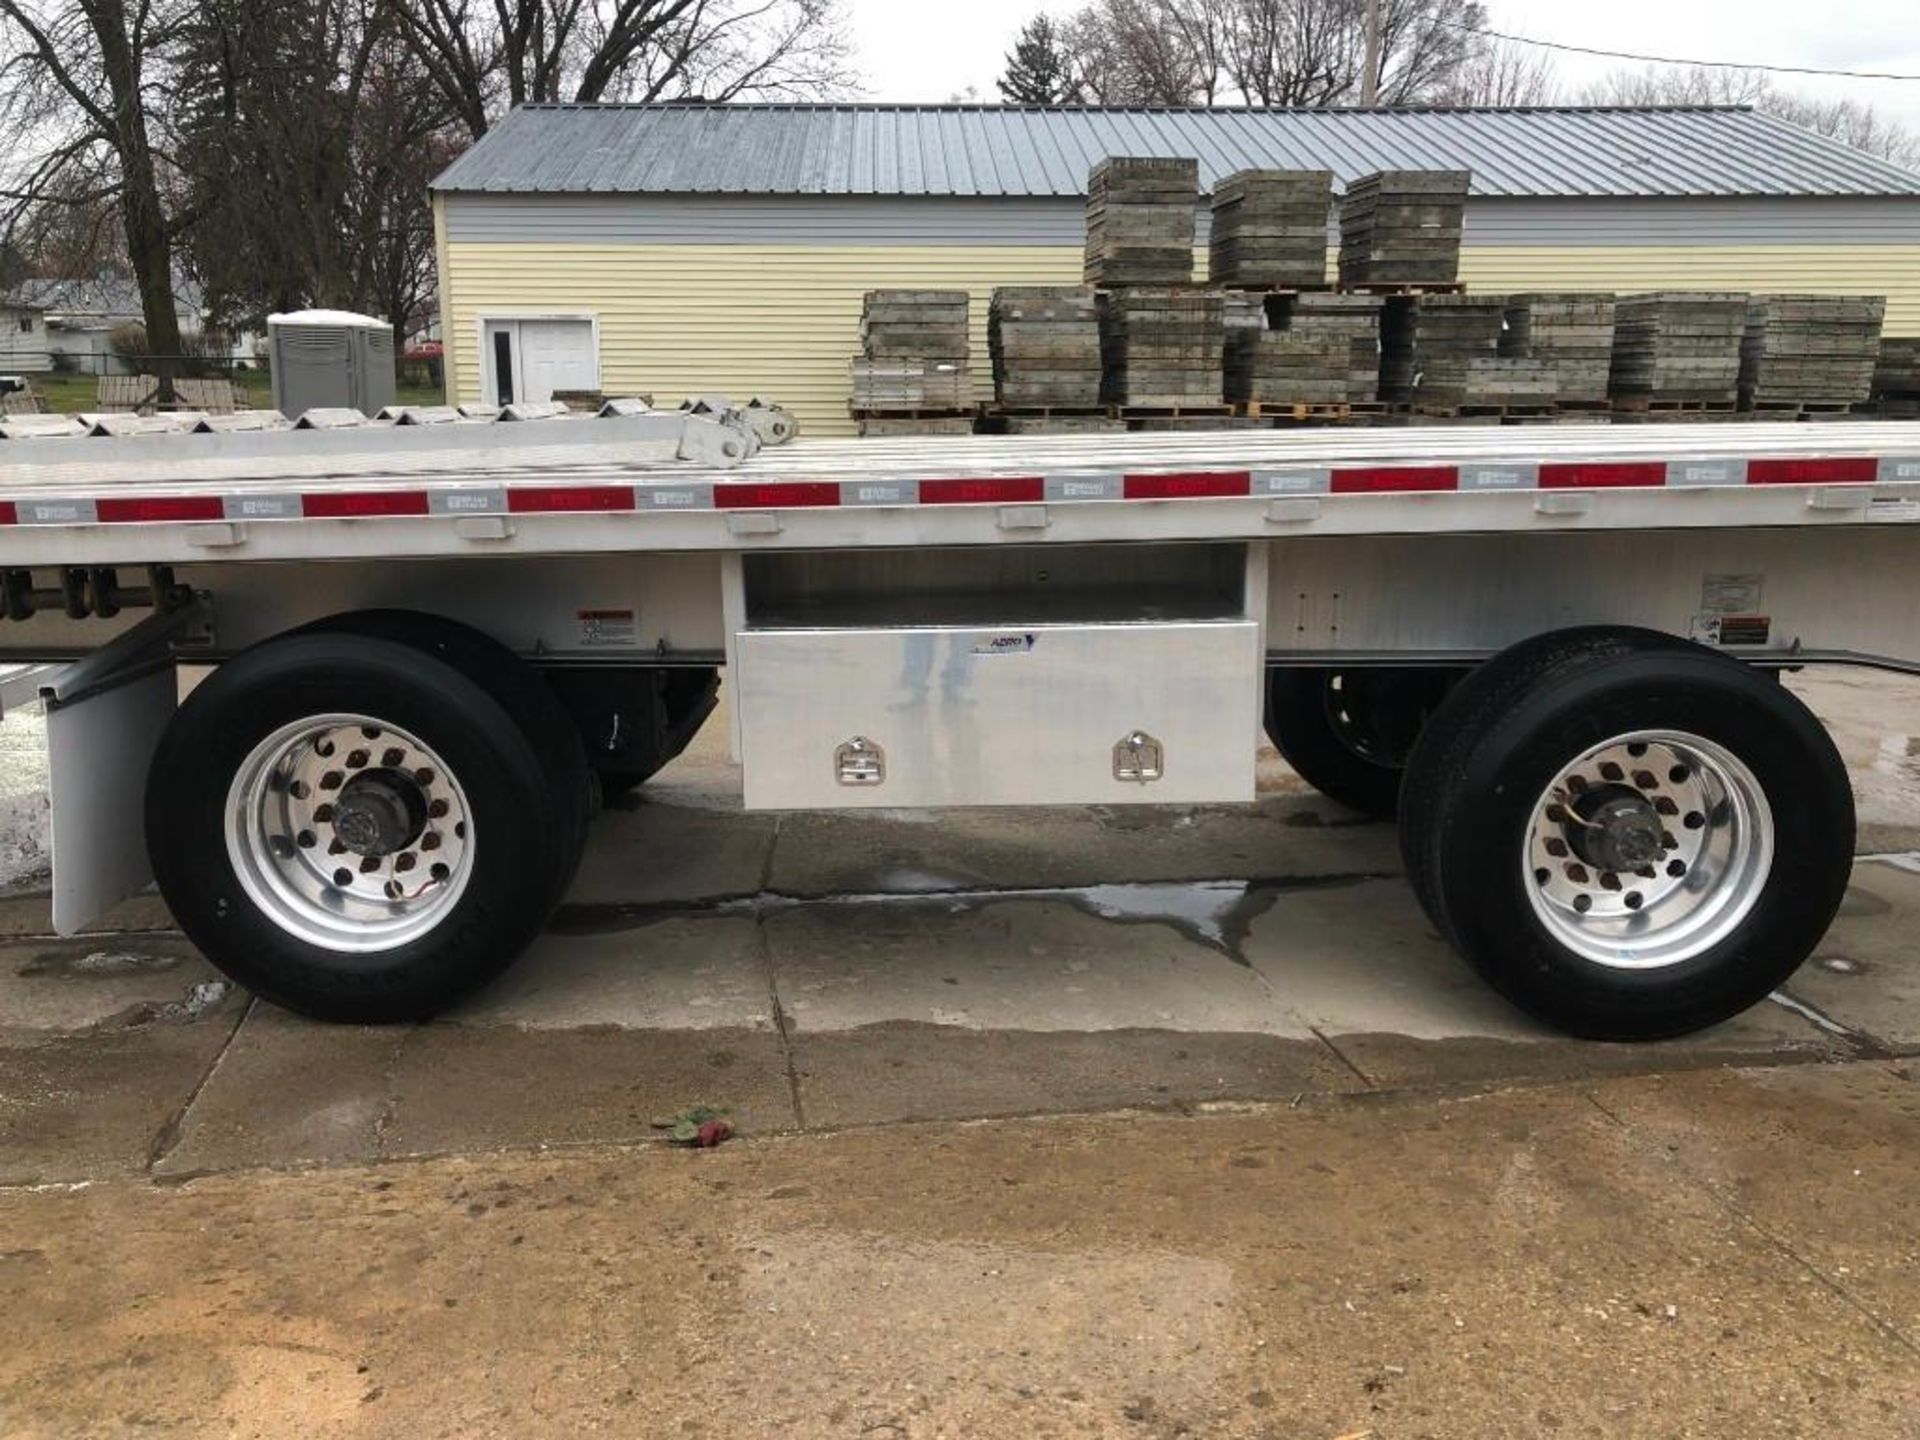 (1) 2018 WILSON Flatbed 53' X 102" Bed, Model AF-1080 SS, VIN #4WW5532A4J6625996 with Ramps, - Image 11 of 29